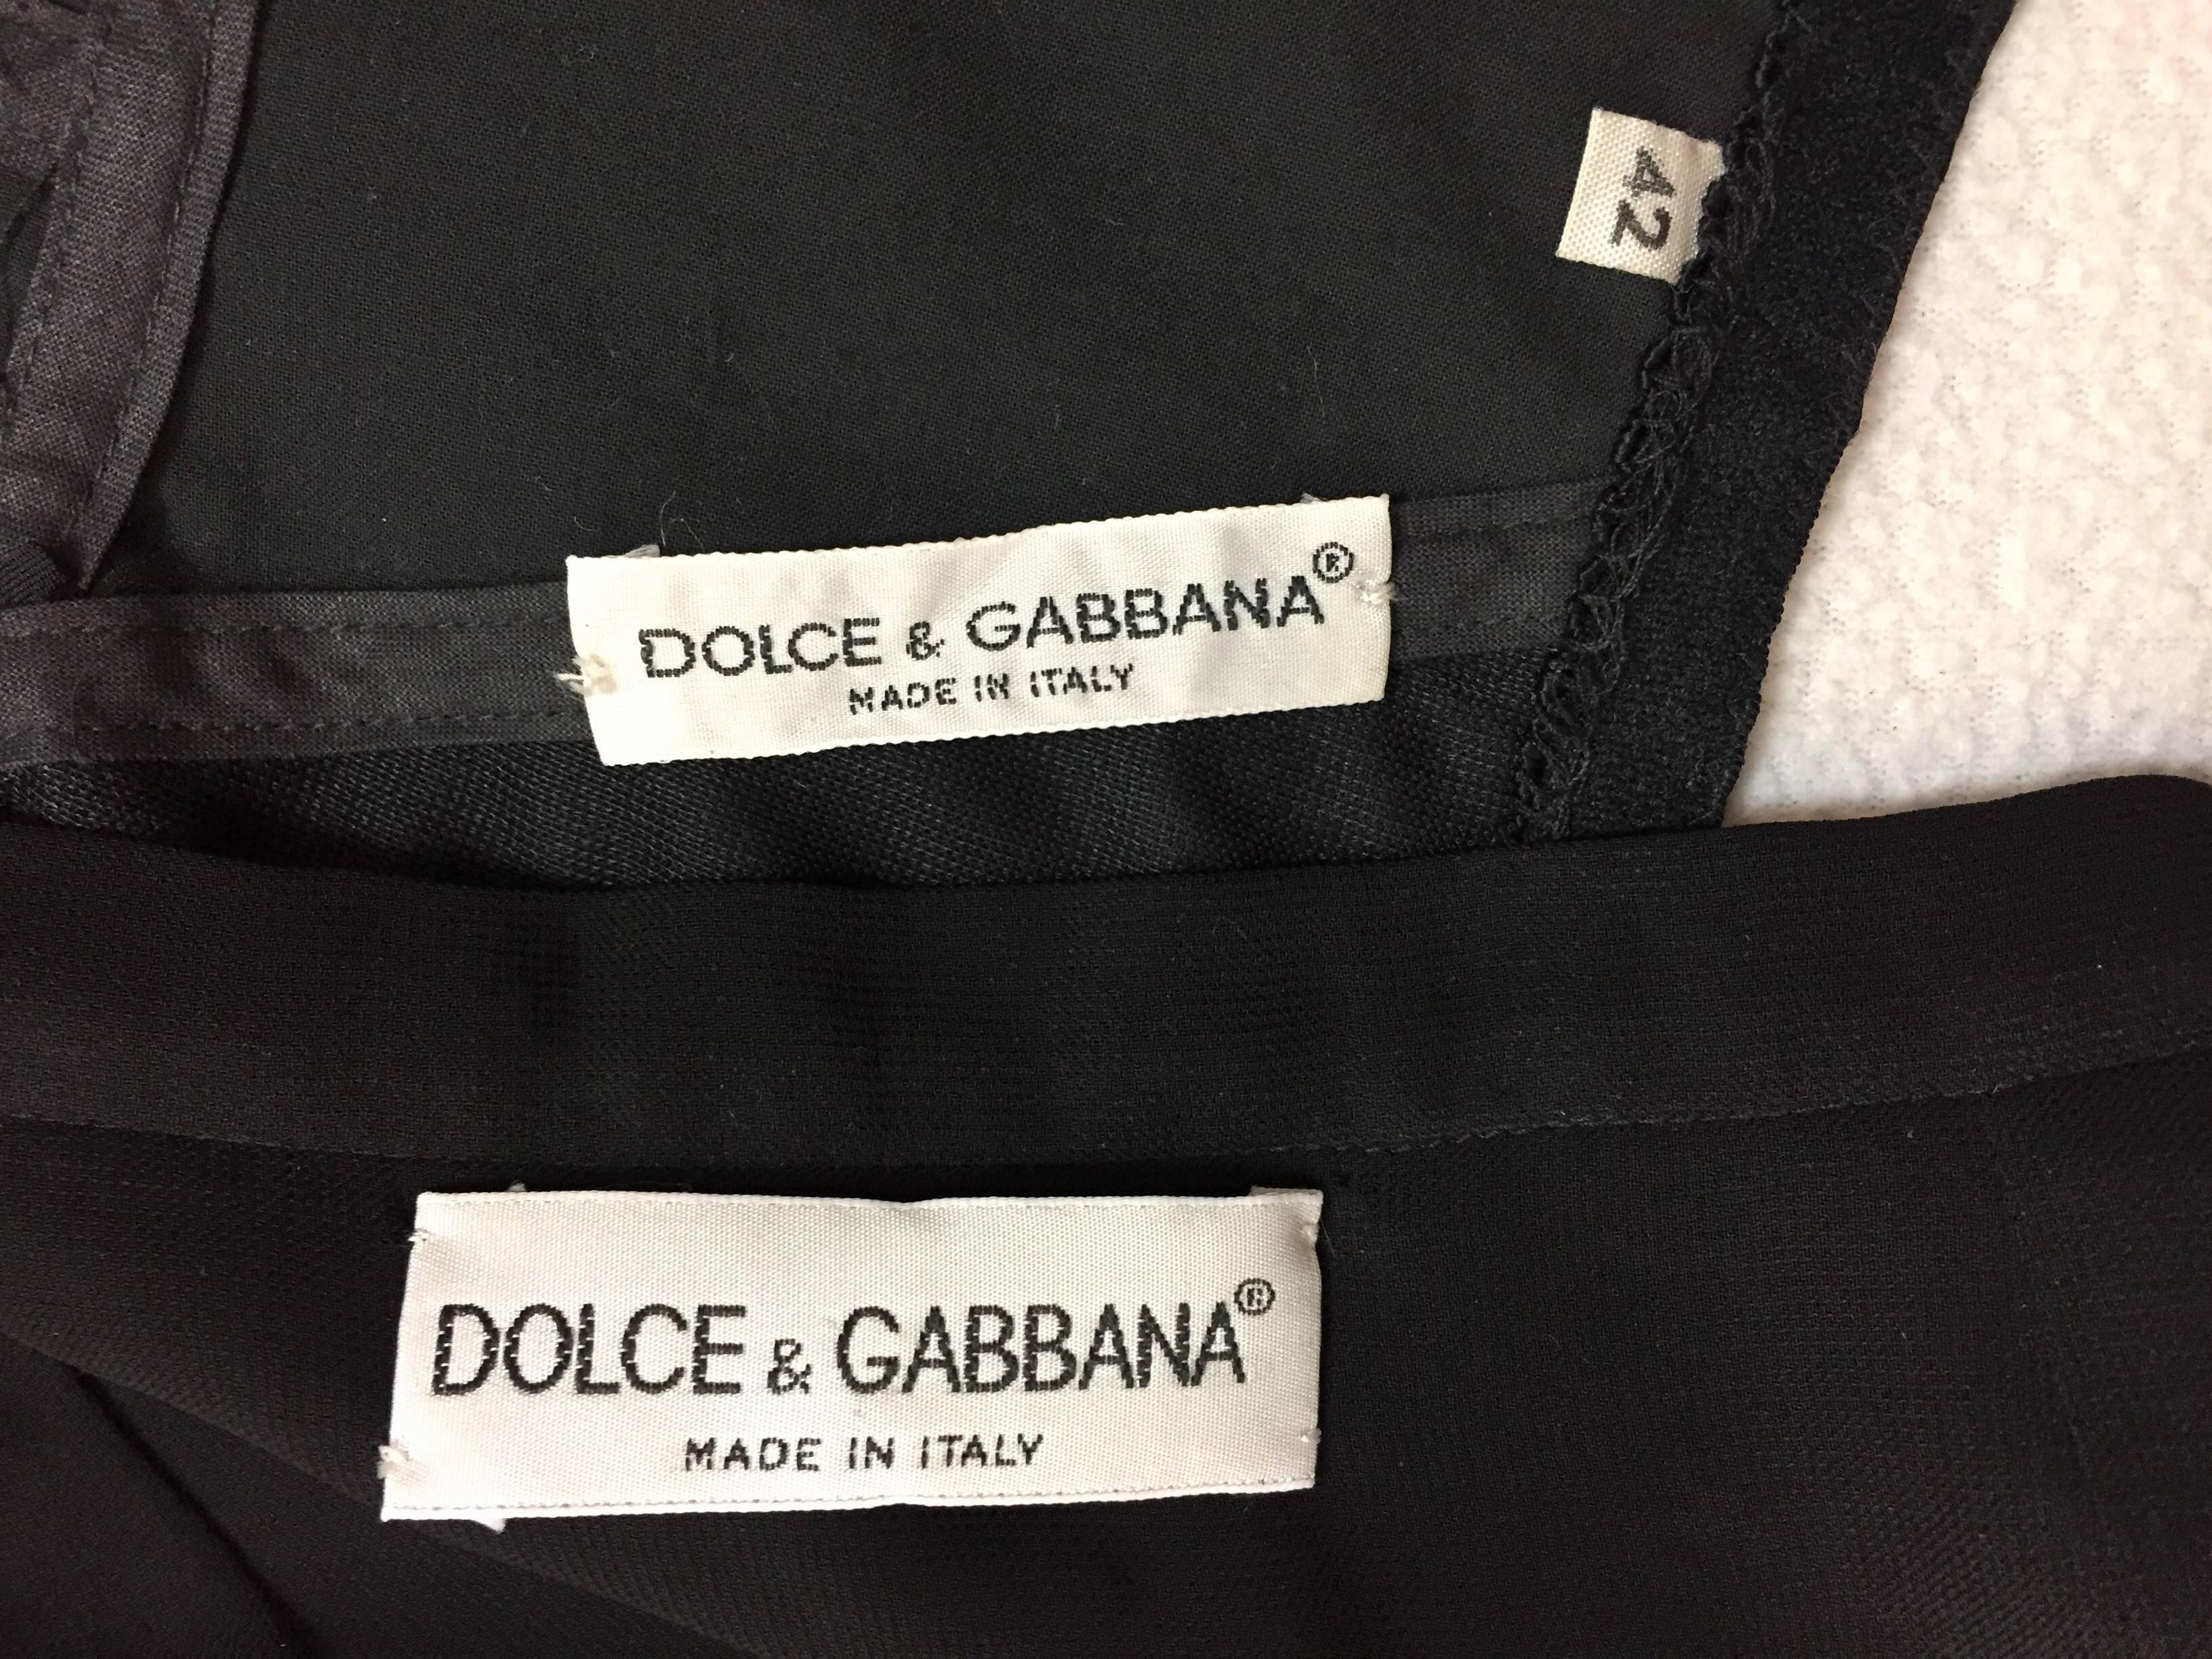 S/S 1993 Dolce & Gabbana Runway Sheer Black Lace Bustier and High Waist Mini In Good Condition In Yukon, OK